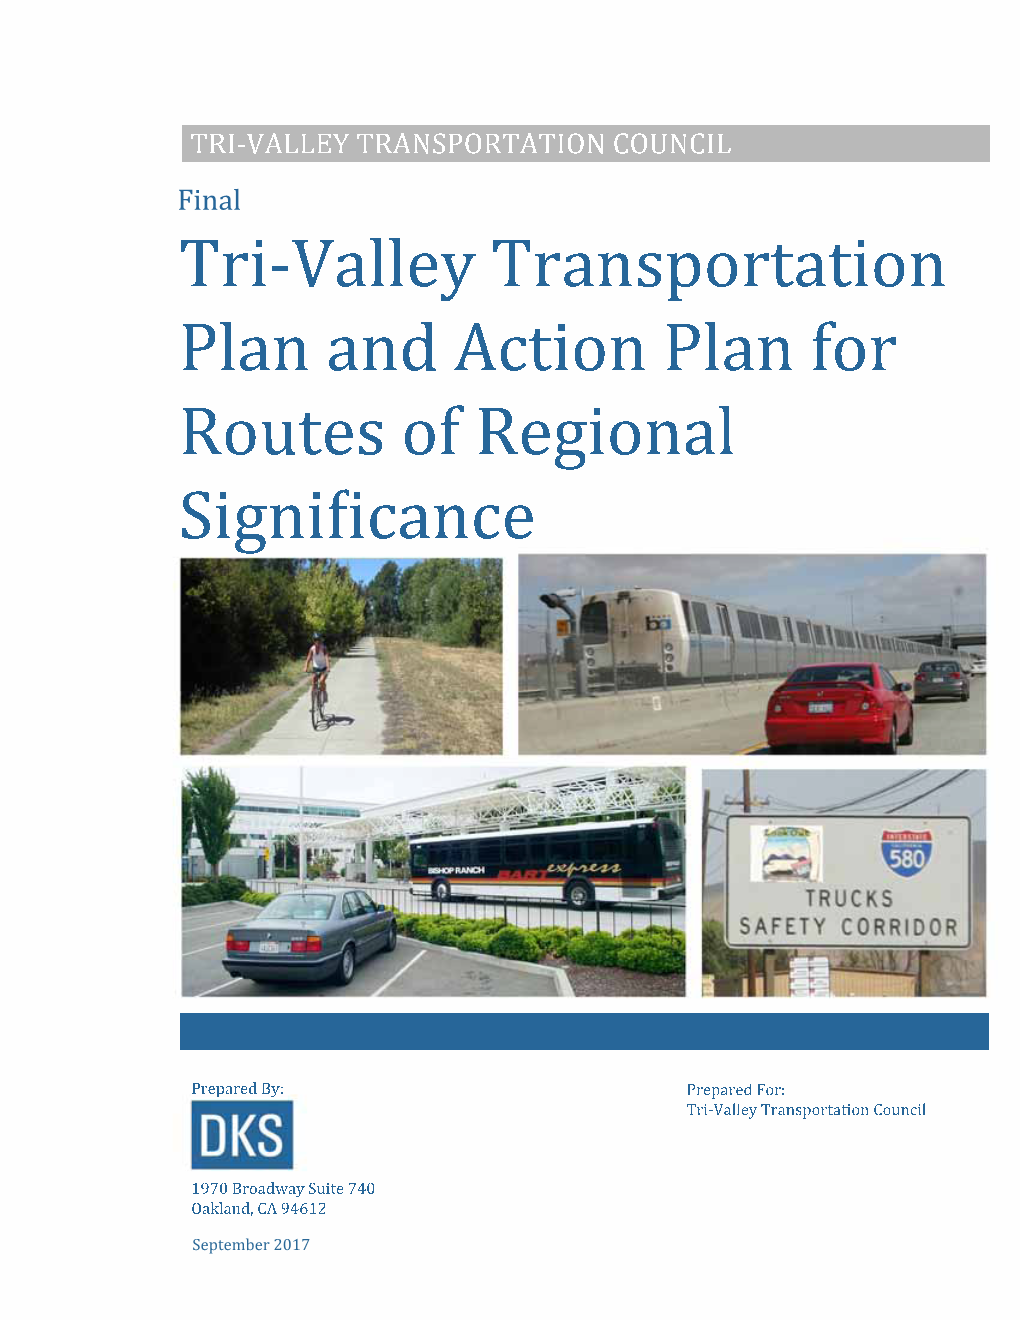 Final Tri-Valley Action Plan